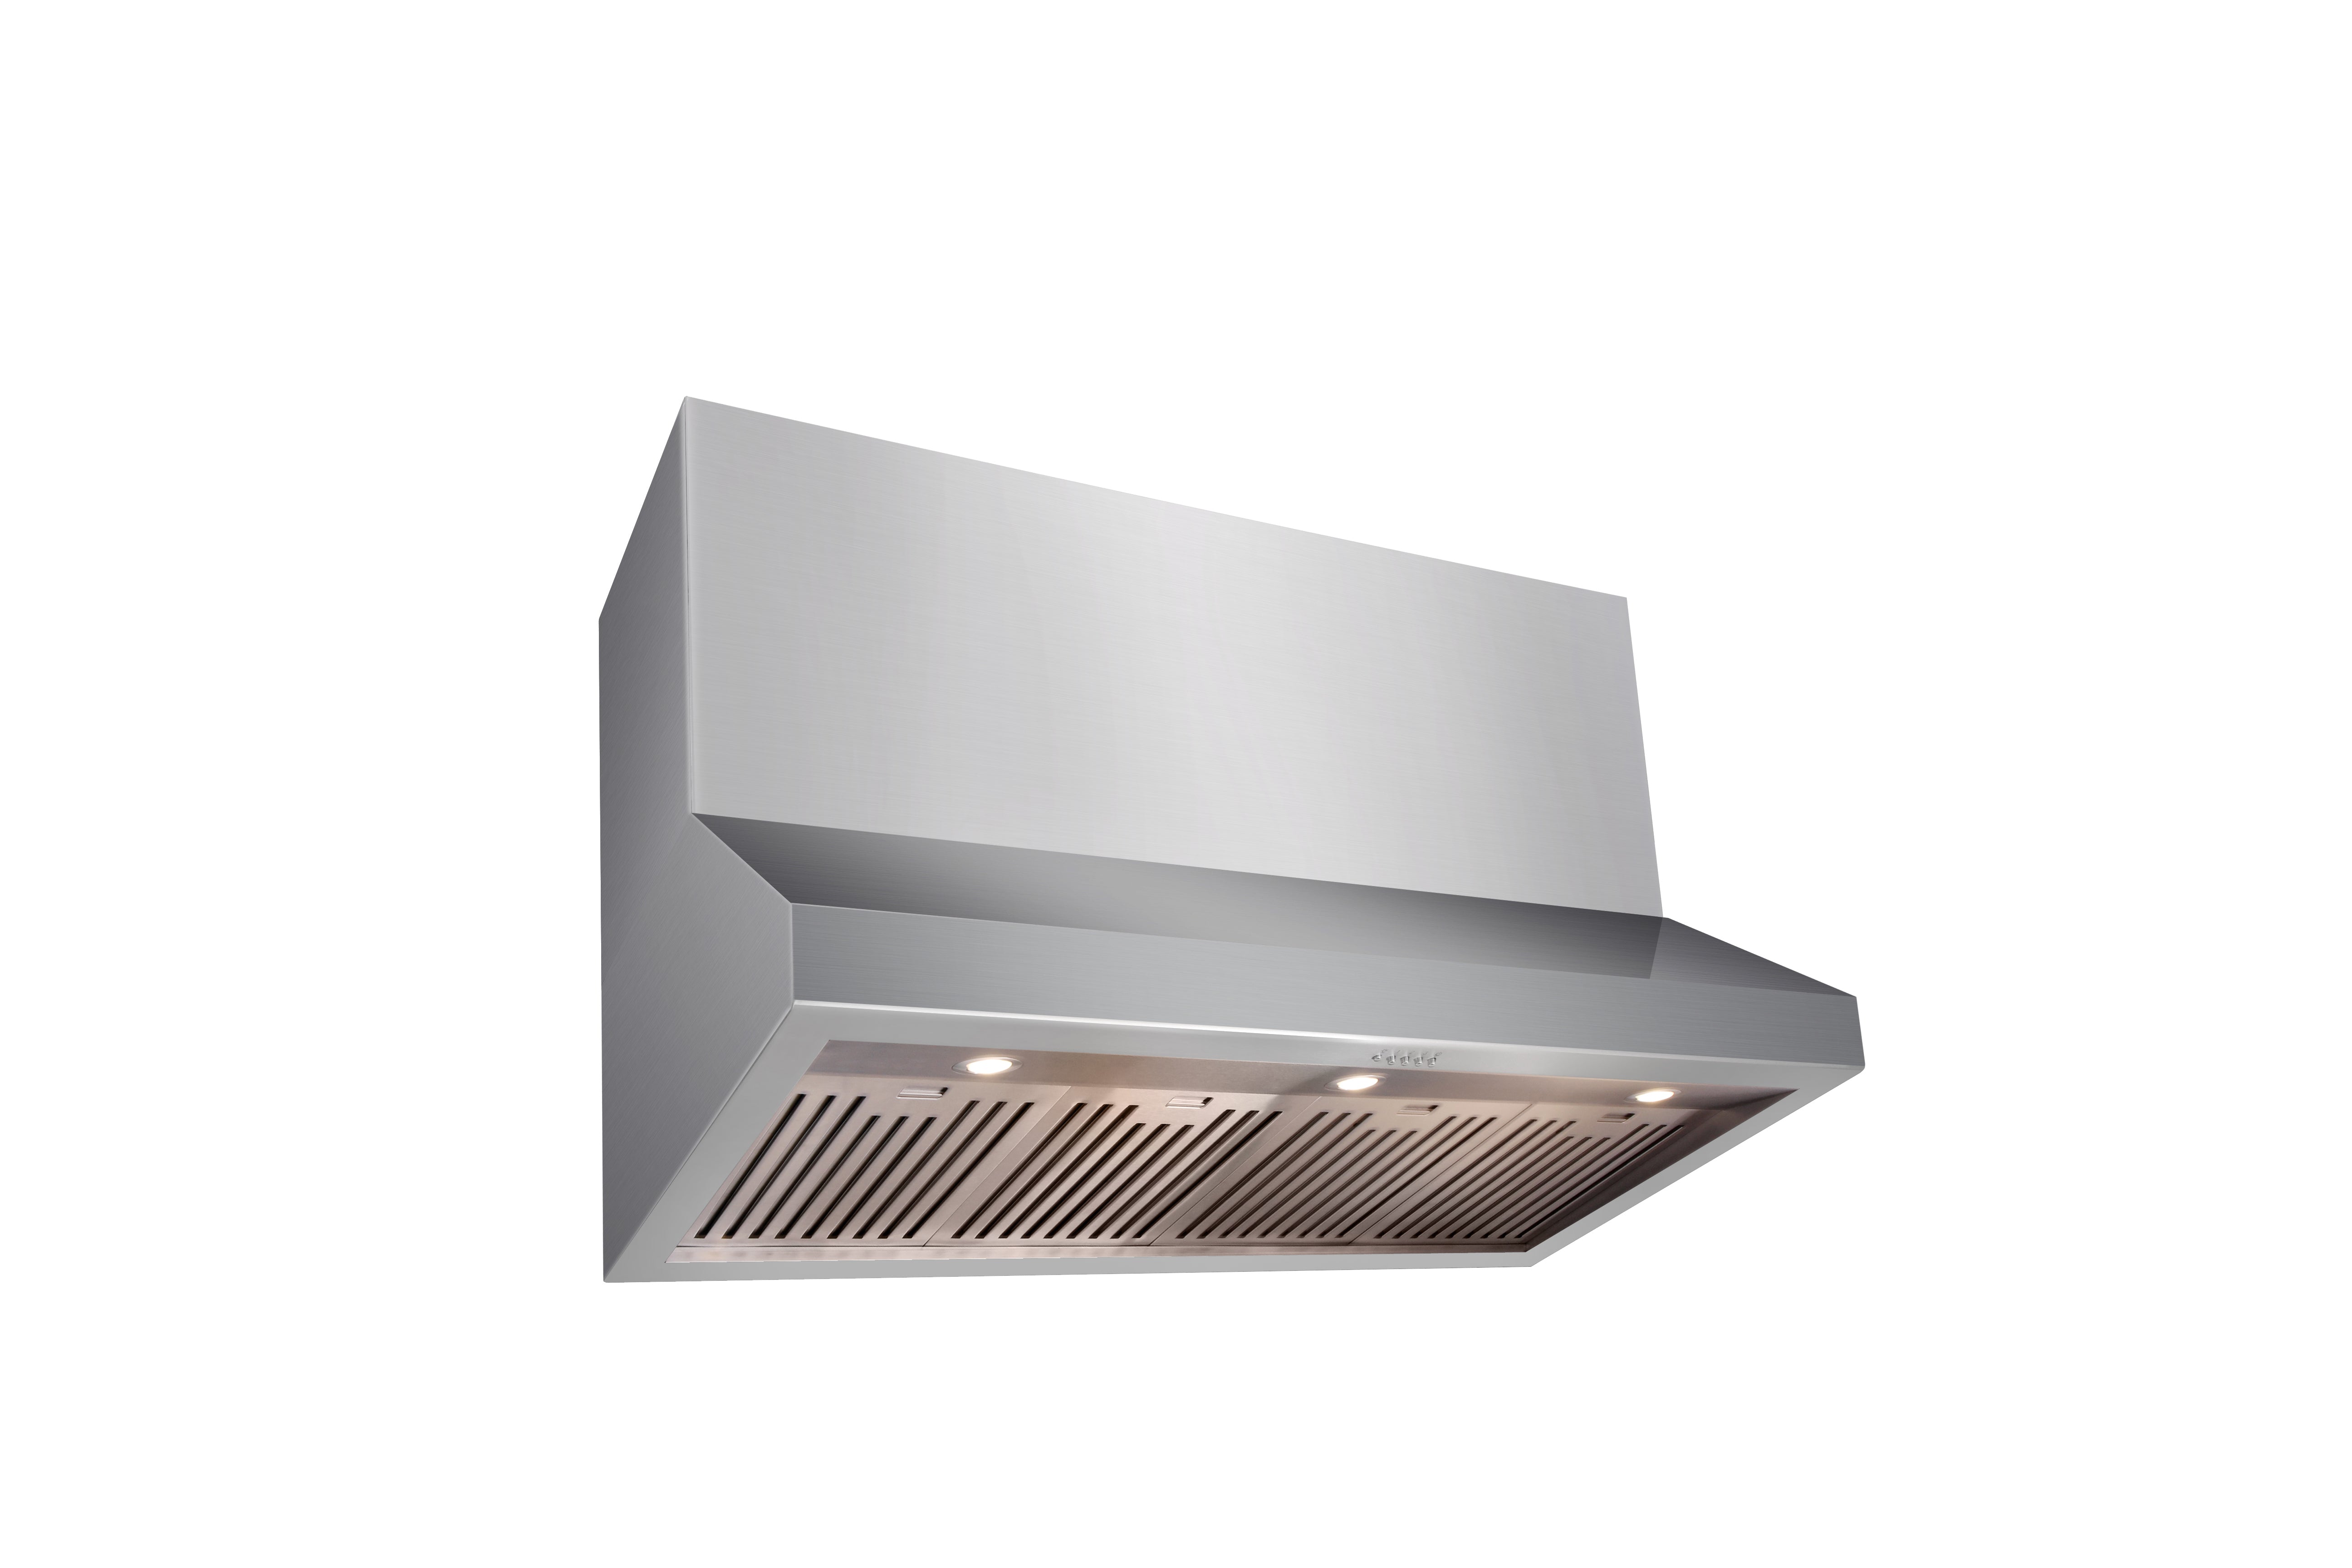 Thor Kitchen 48 Inch Professional Range Hood, 16.5 Inches Tall in Stainless Steel- Model TRH4805 (Renewed)